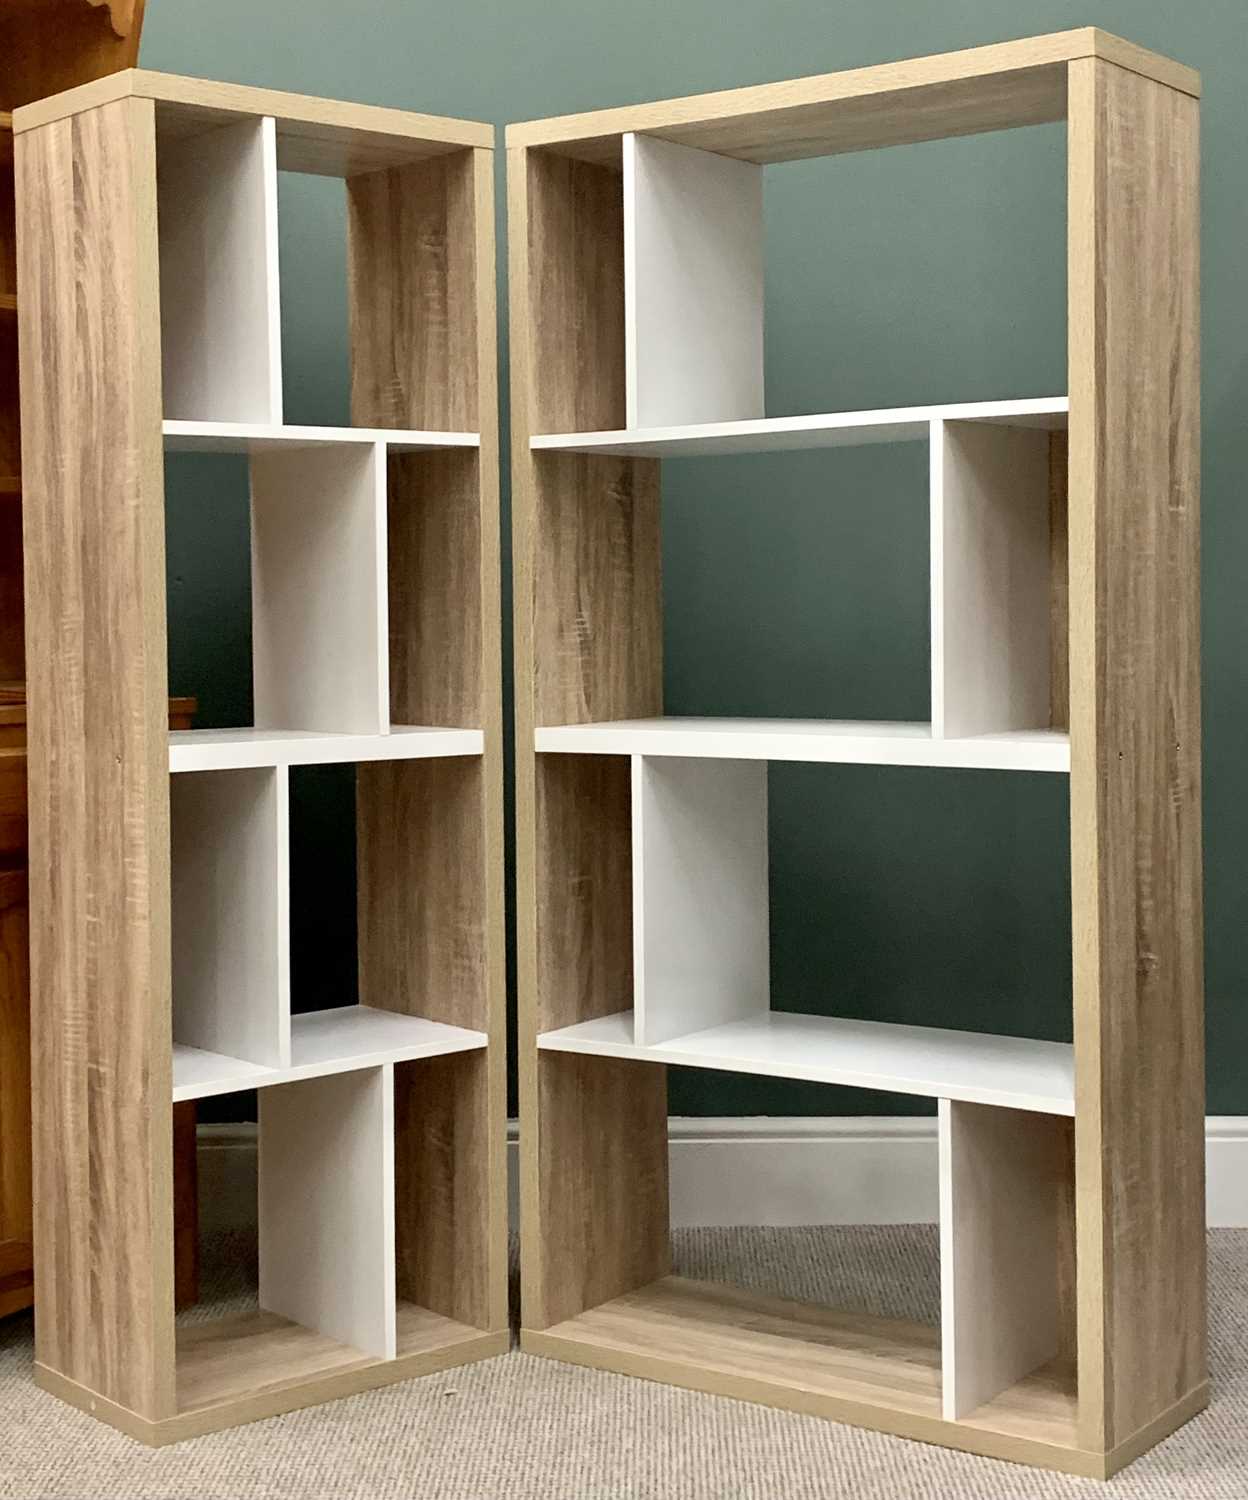 MODERN PINE DRESSER - 183cms H, 113cms W, 43cms D and TWO MULTI-SHELVED ROOM DIVIDERS - 156cms H, - Image 3 of 5